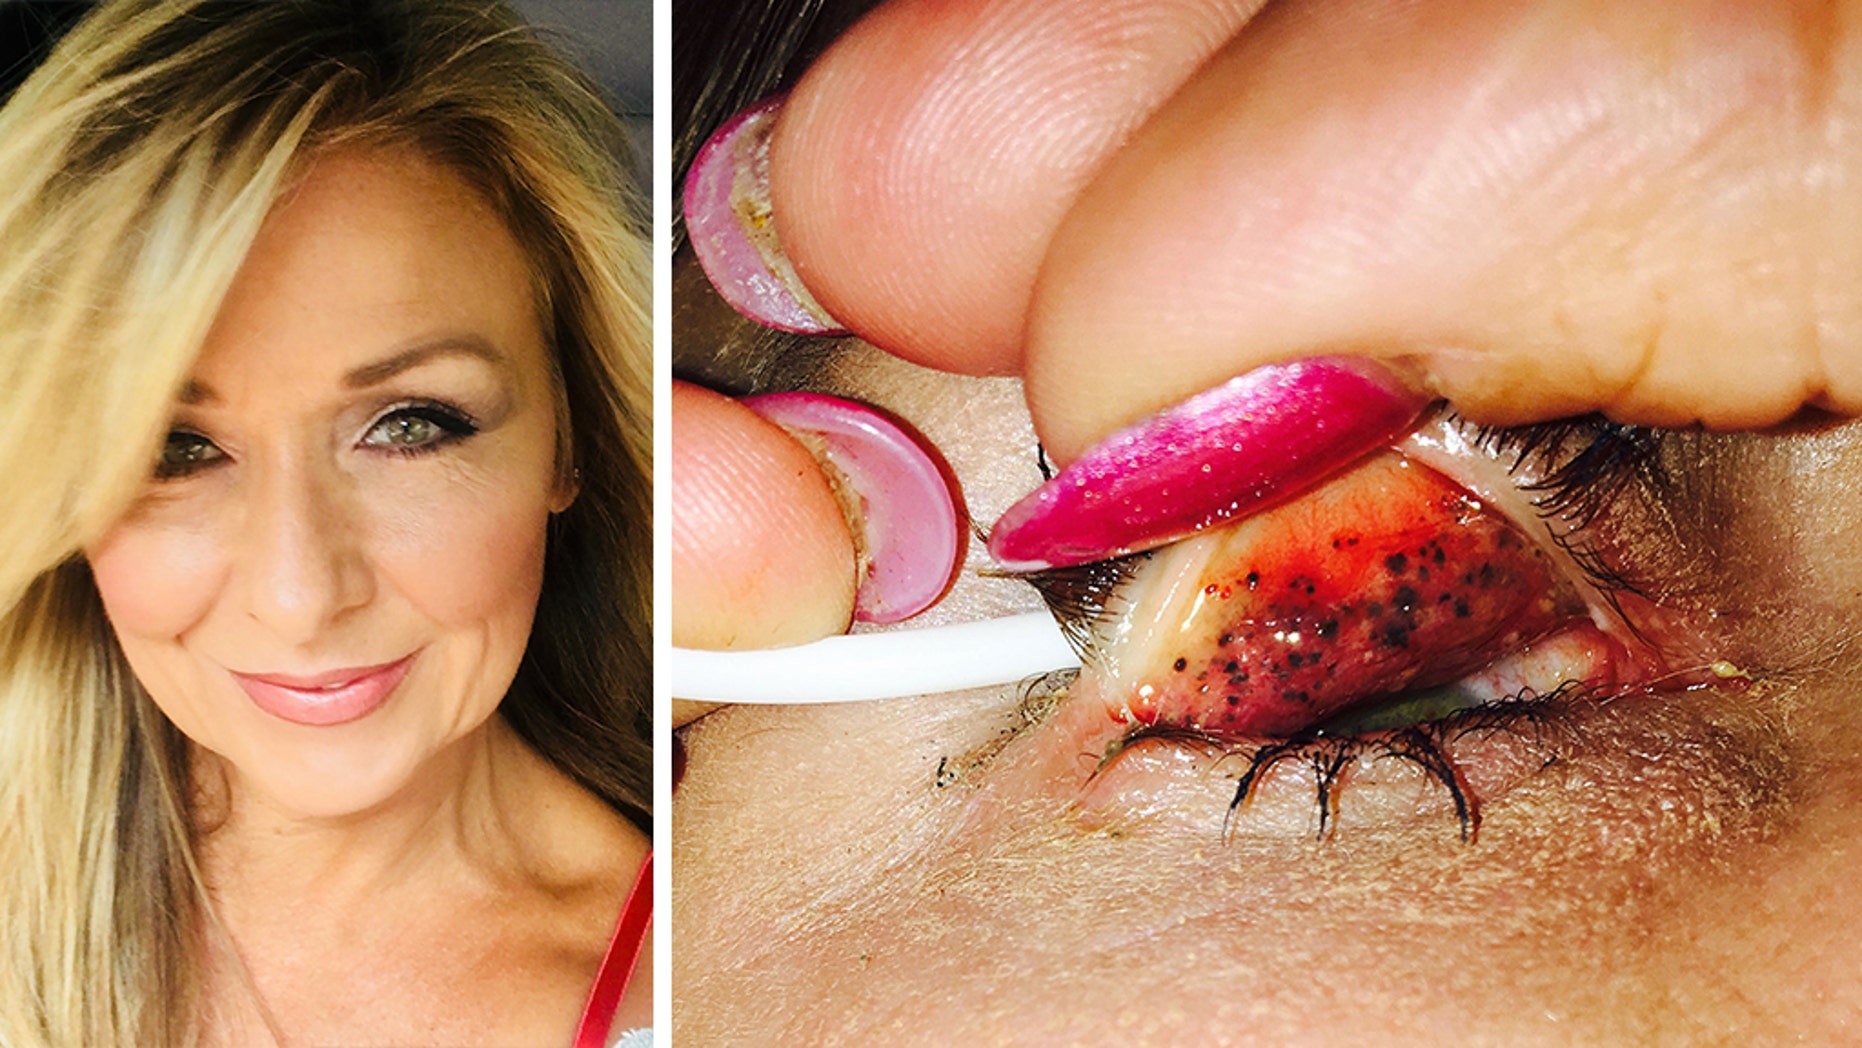 Theresa Lynch, 50, left her mascara on for 25 years and a doctor discovered something shocking underneath her eyelids. Now, Lynch is warning others to "properly take your makeup off every single night."